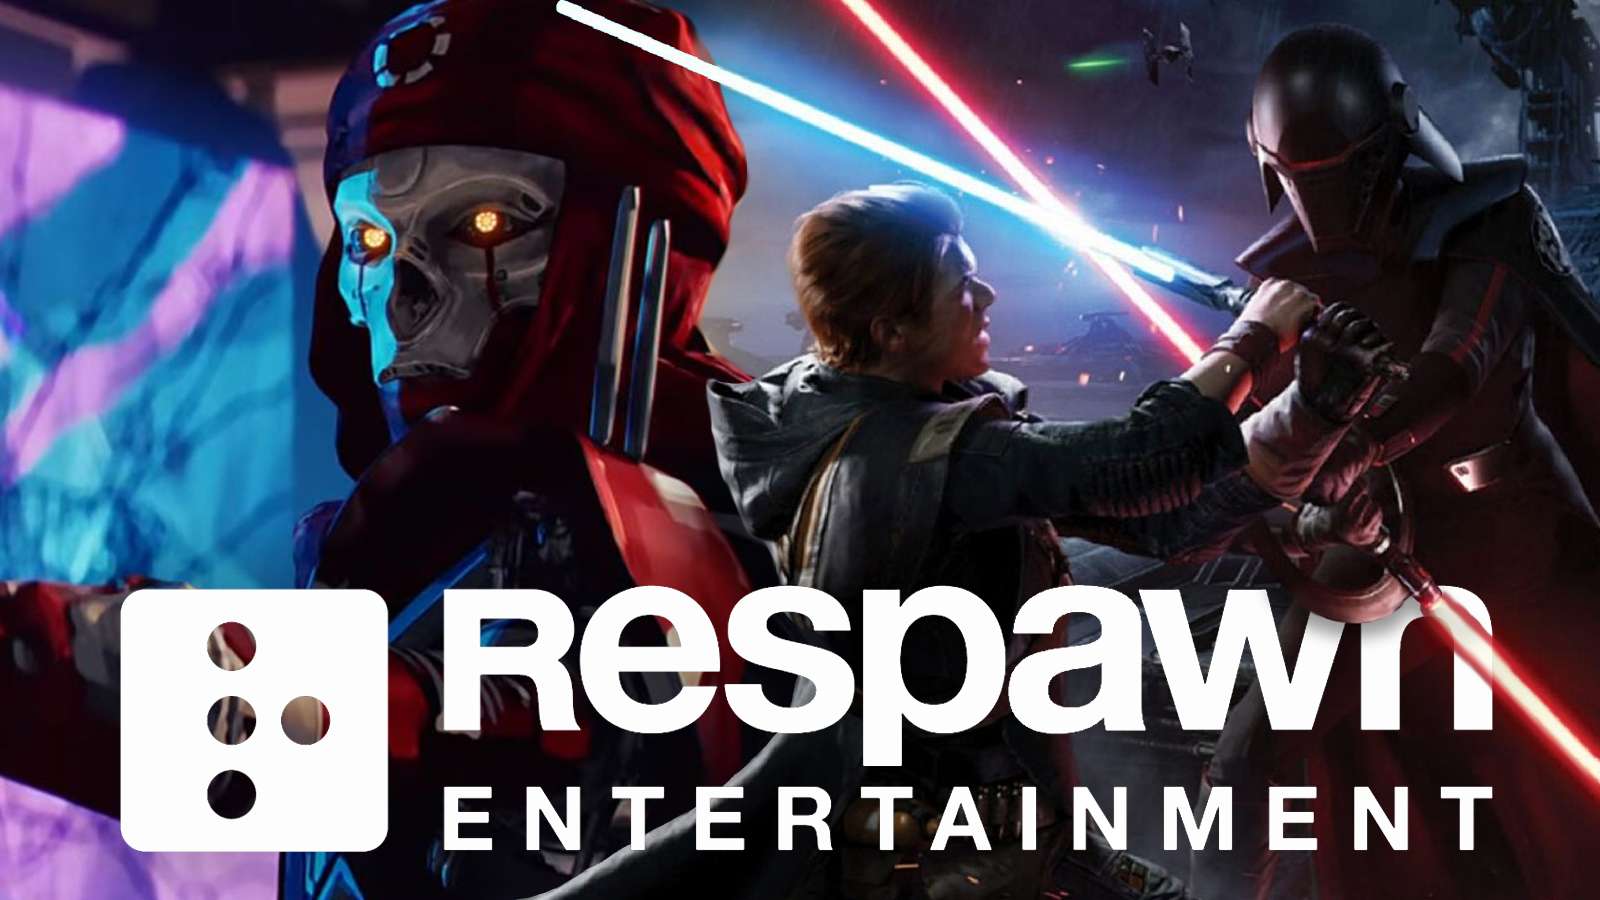 Revenant from Apex Legends and Cal Ketsis from Star Wars Jedi: Fallen Order above Respawn Entertainment.